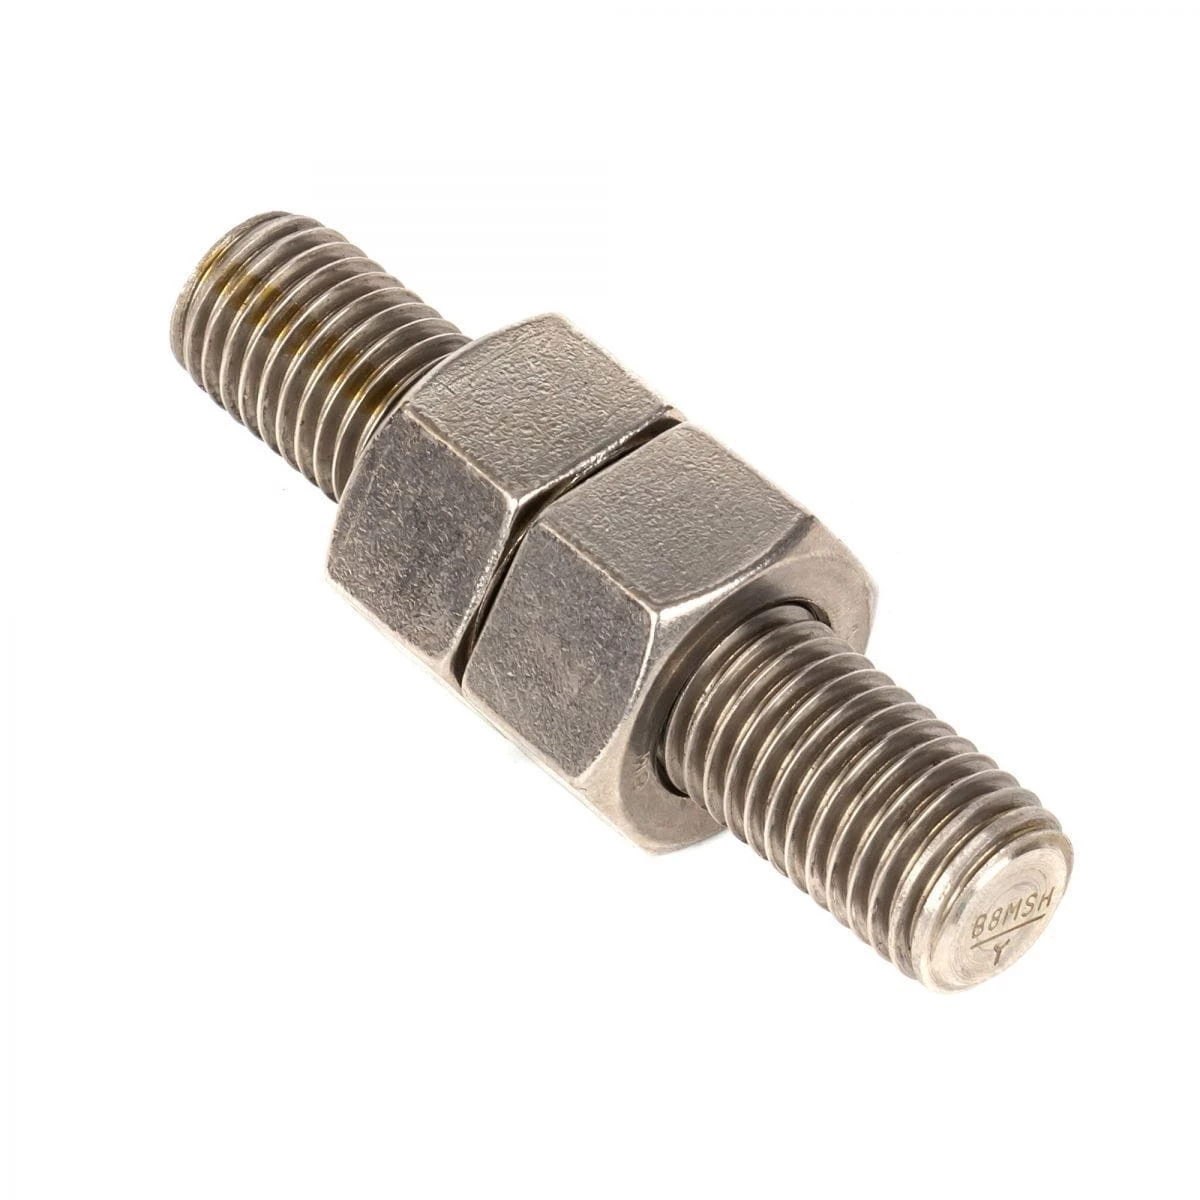 Stainless Steel Screw with Two Nuts, 7/8 Inch, ASME B18.31.2